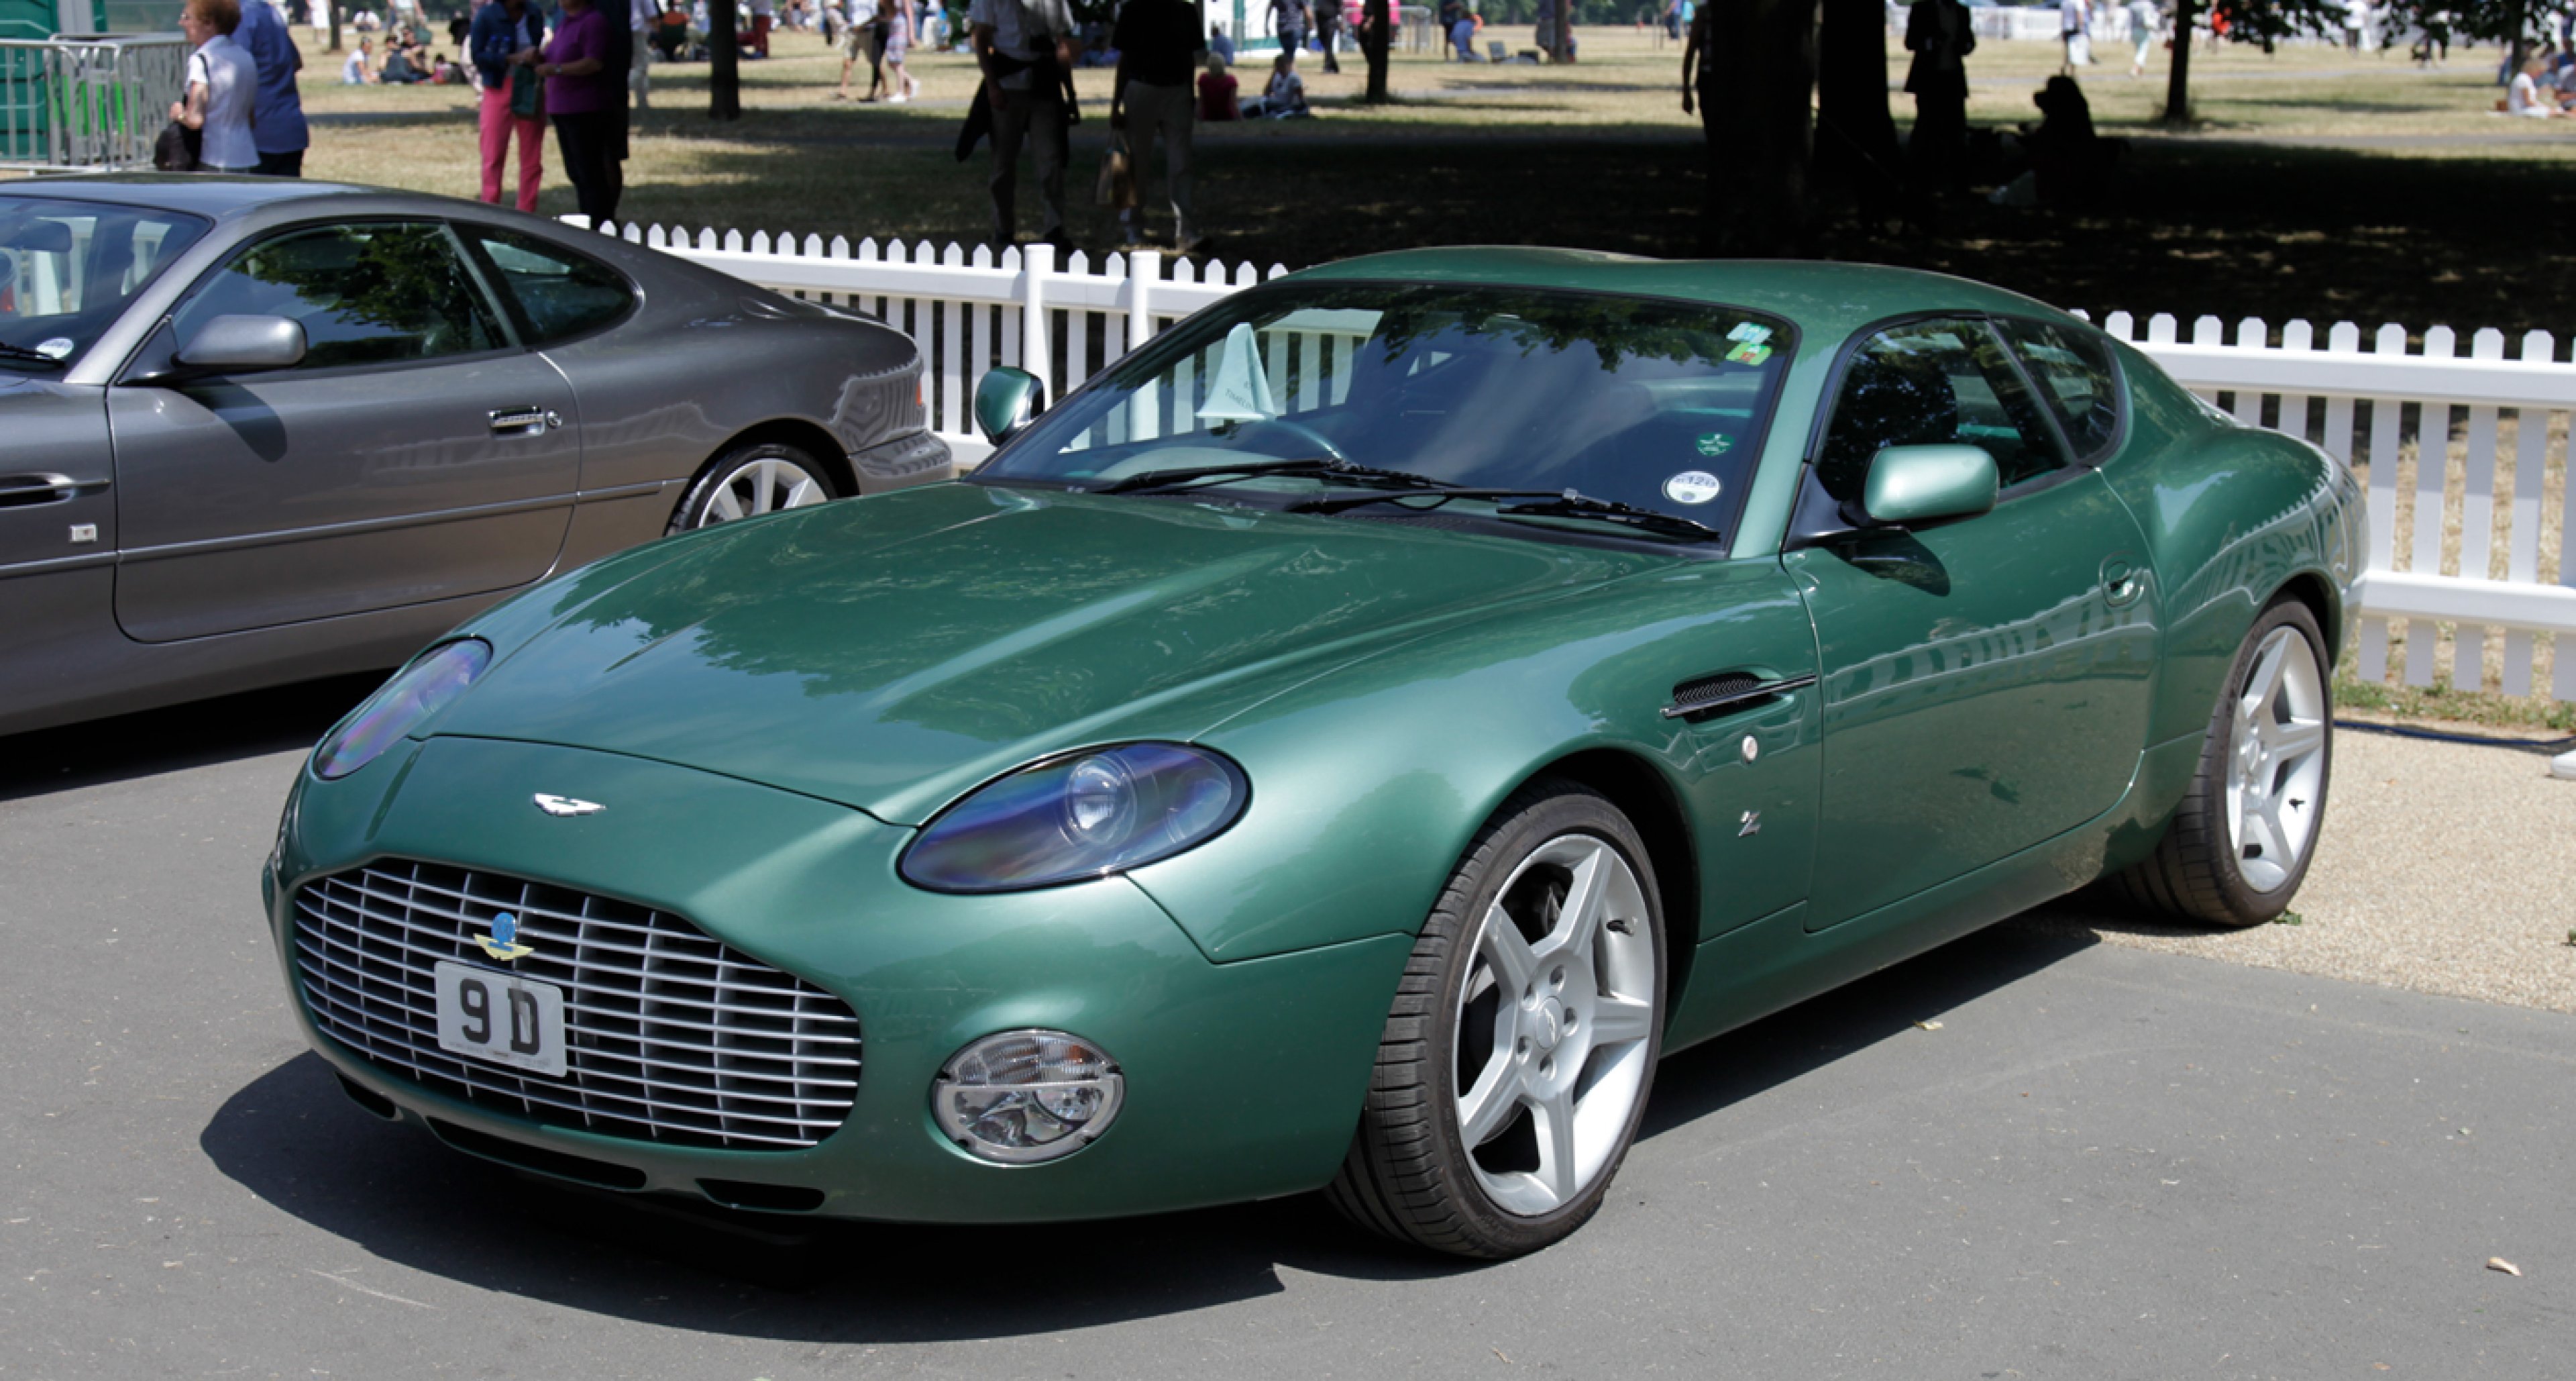 The very best of 100 years: Aston Martin at Kensington Palace Gardens ...